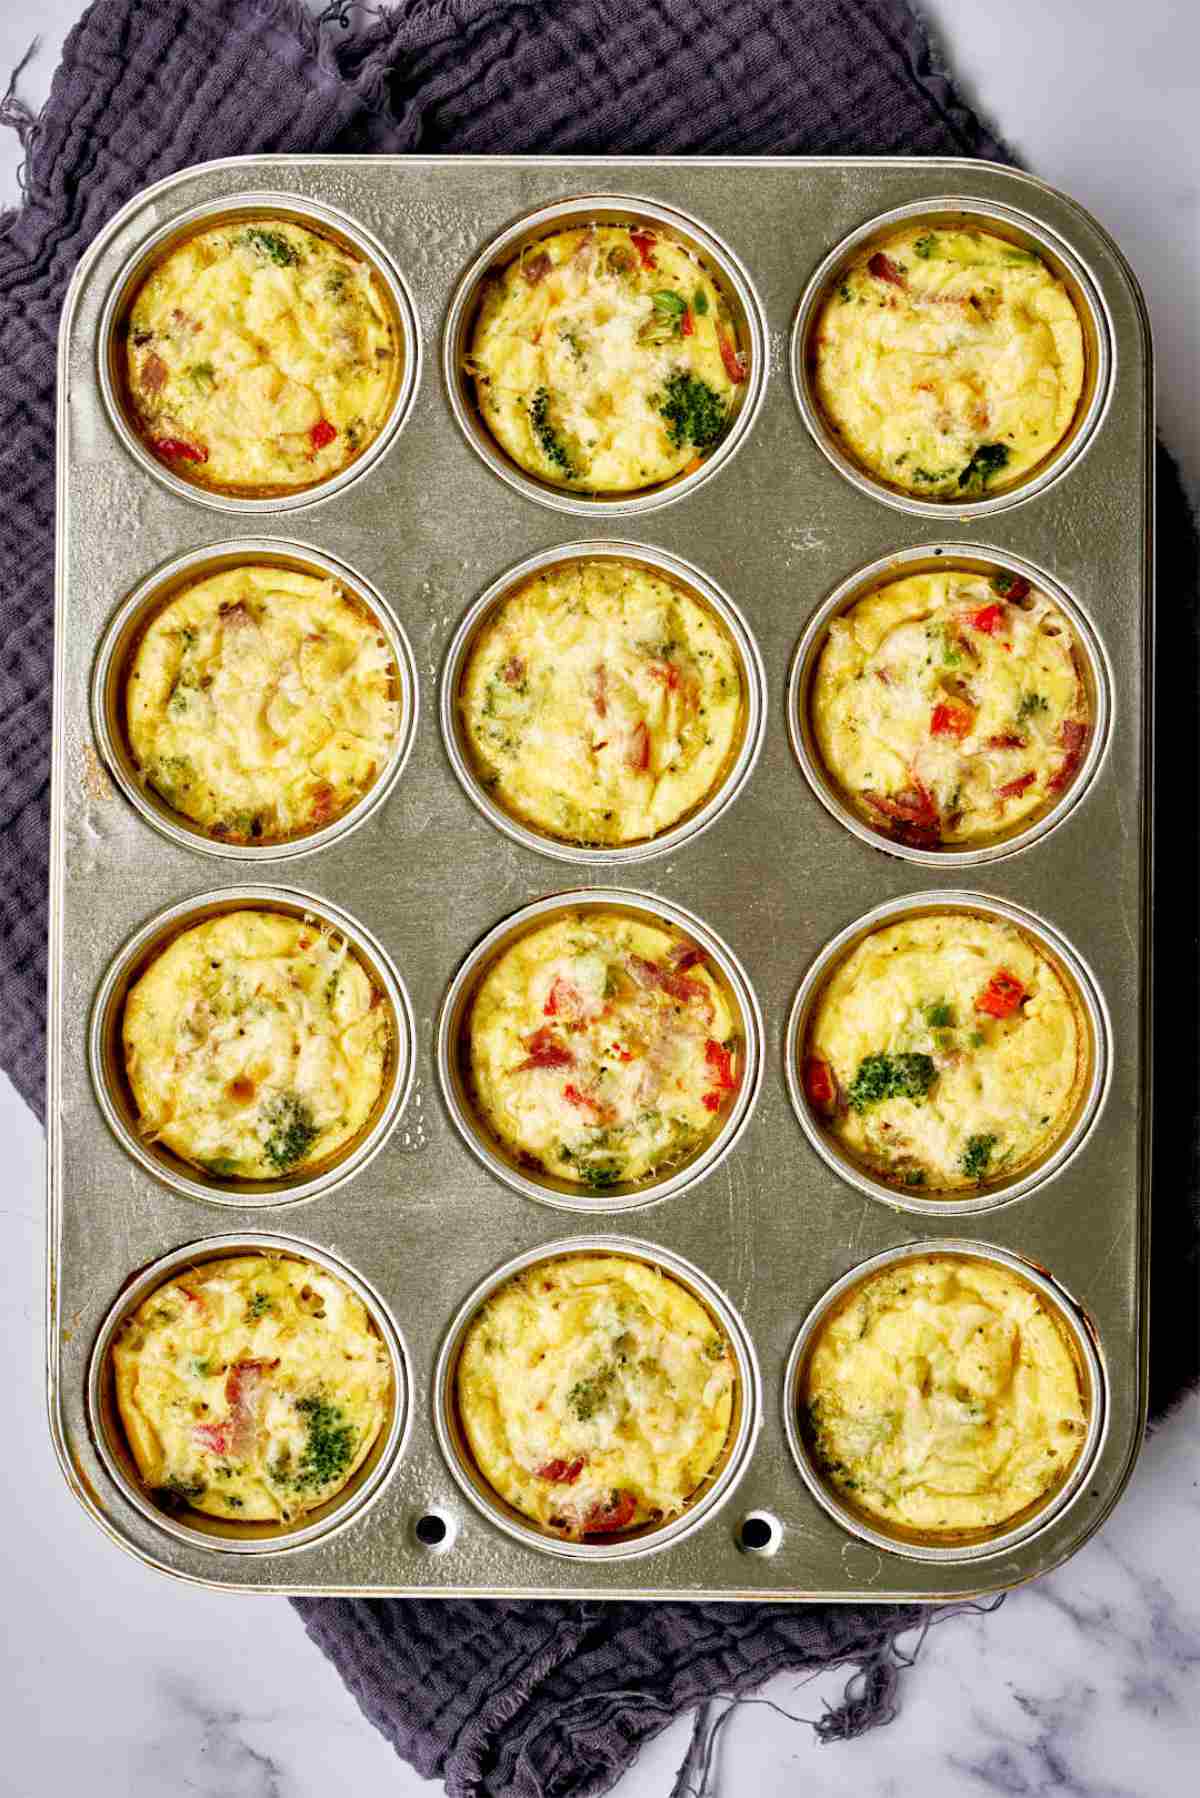 Healthy Muffin Tin Egg Cups - Baked Breakfast Muffin Tin Eggs